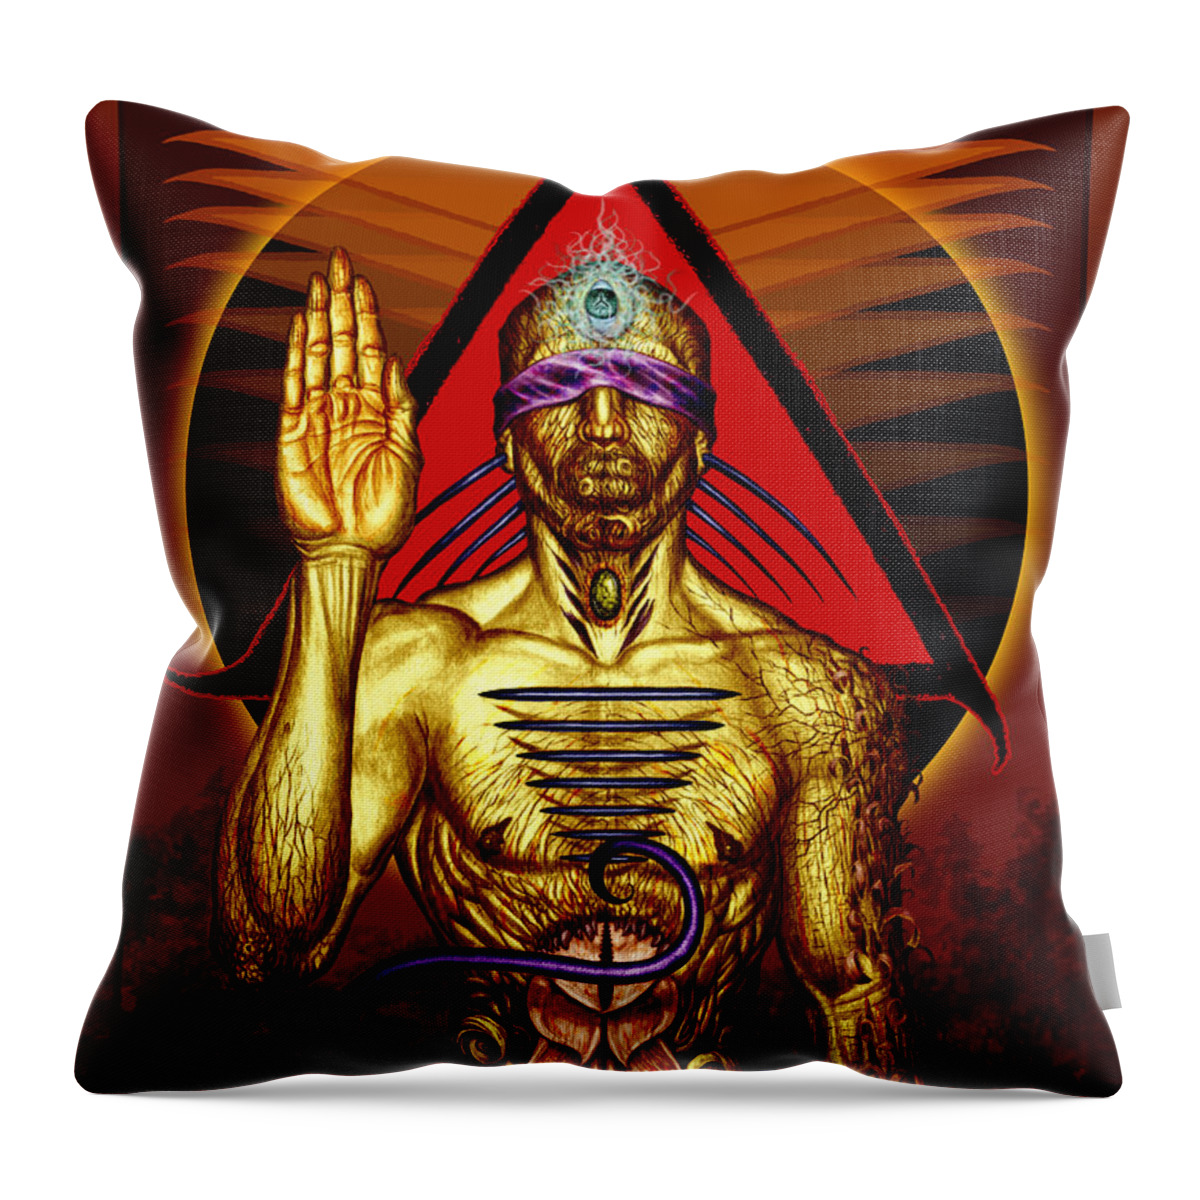 Tonykoehl Throw Pillow featuring the mixed media Ancestral Intuition by Tony Koehl